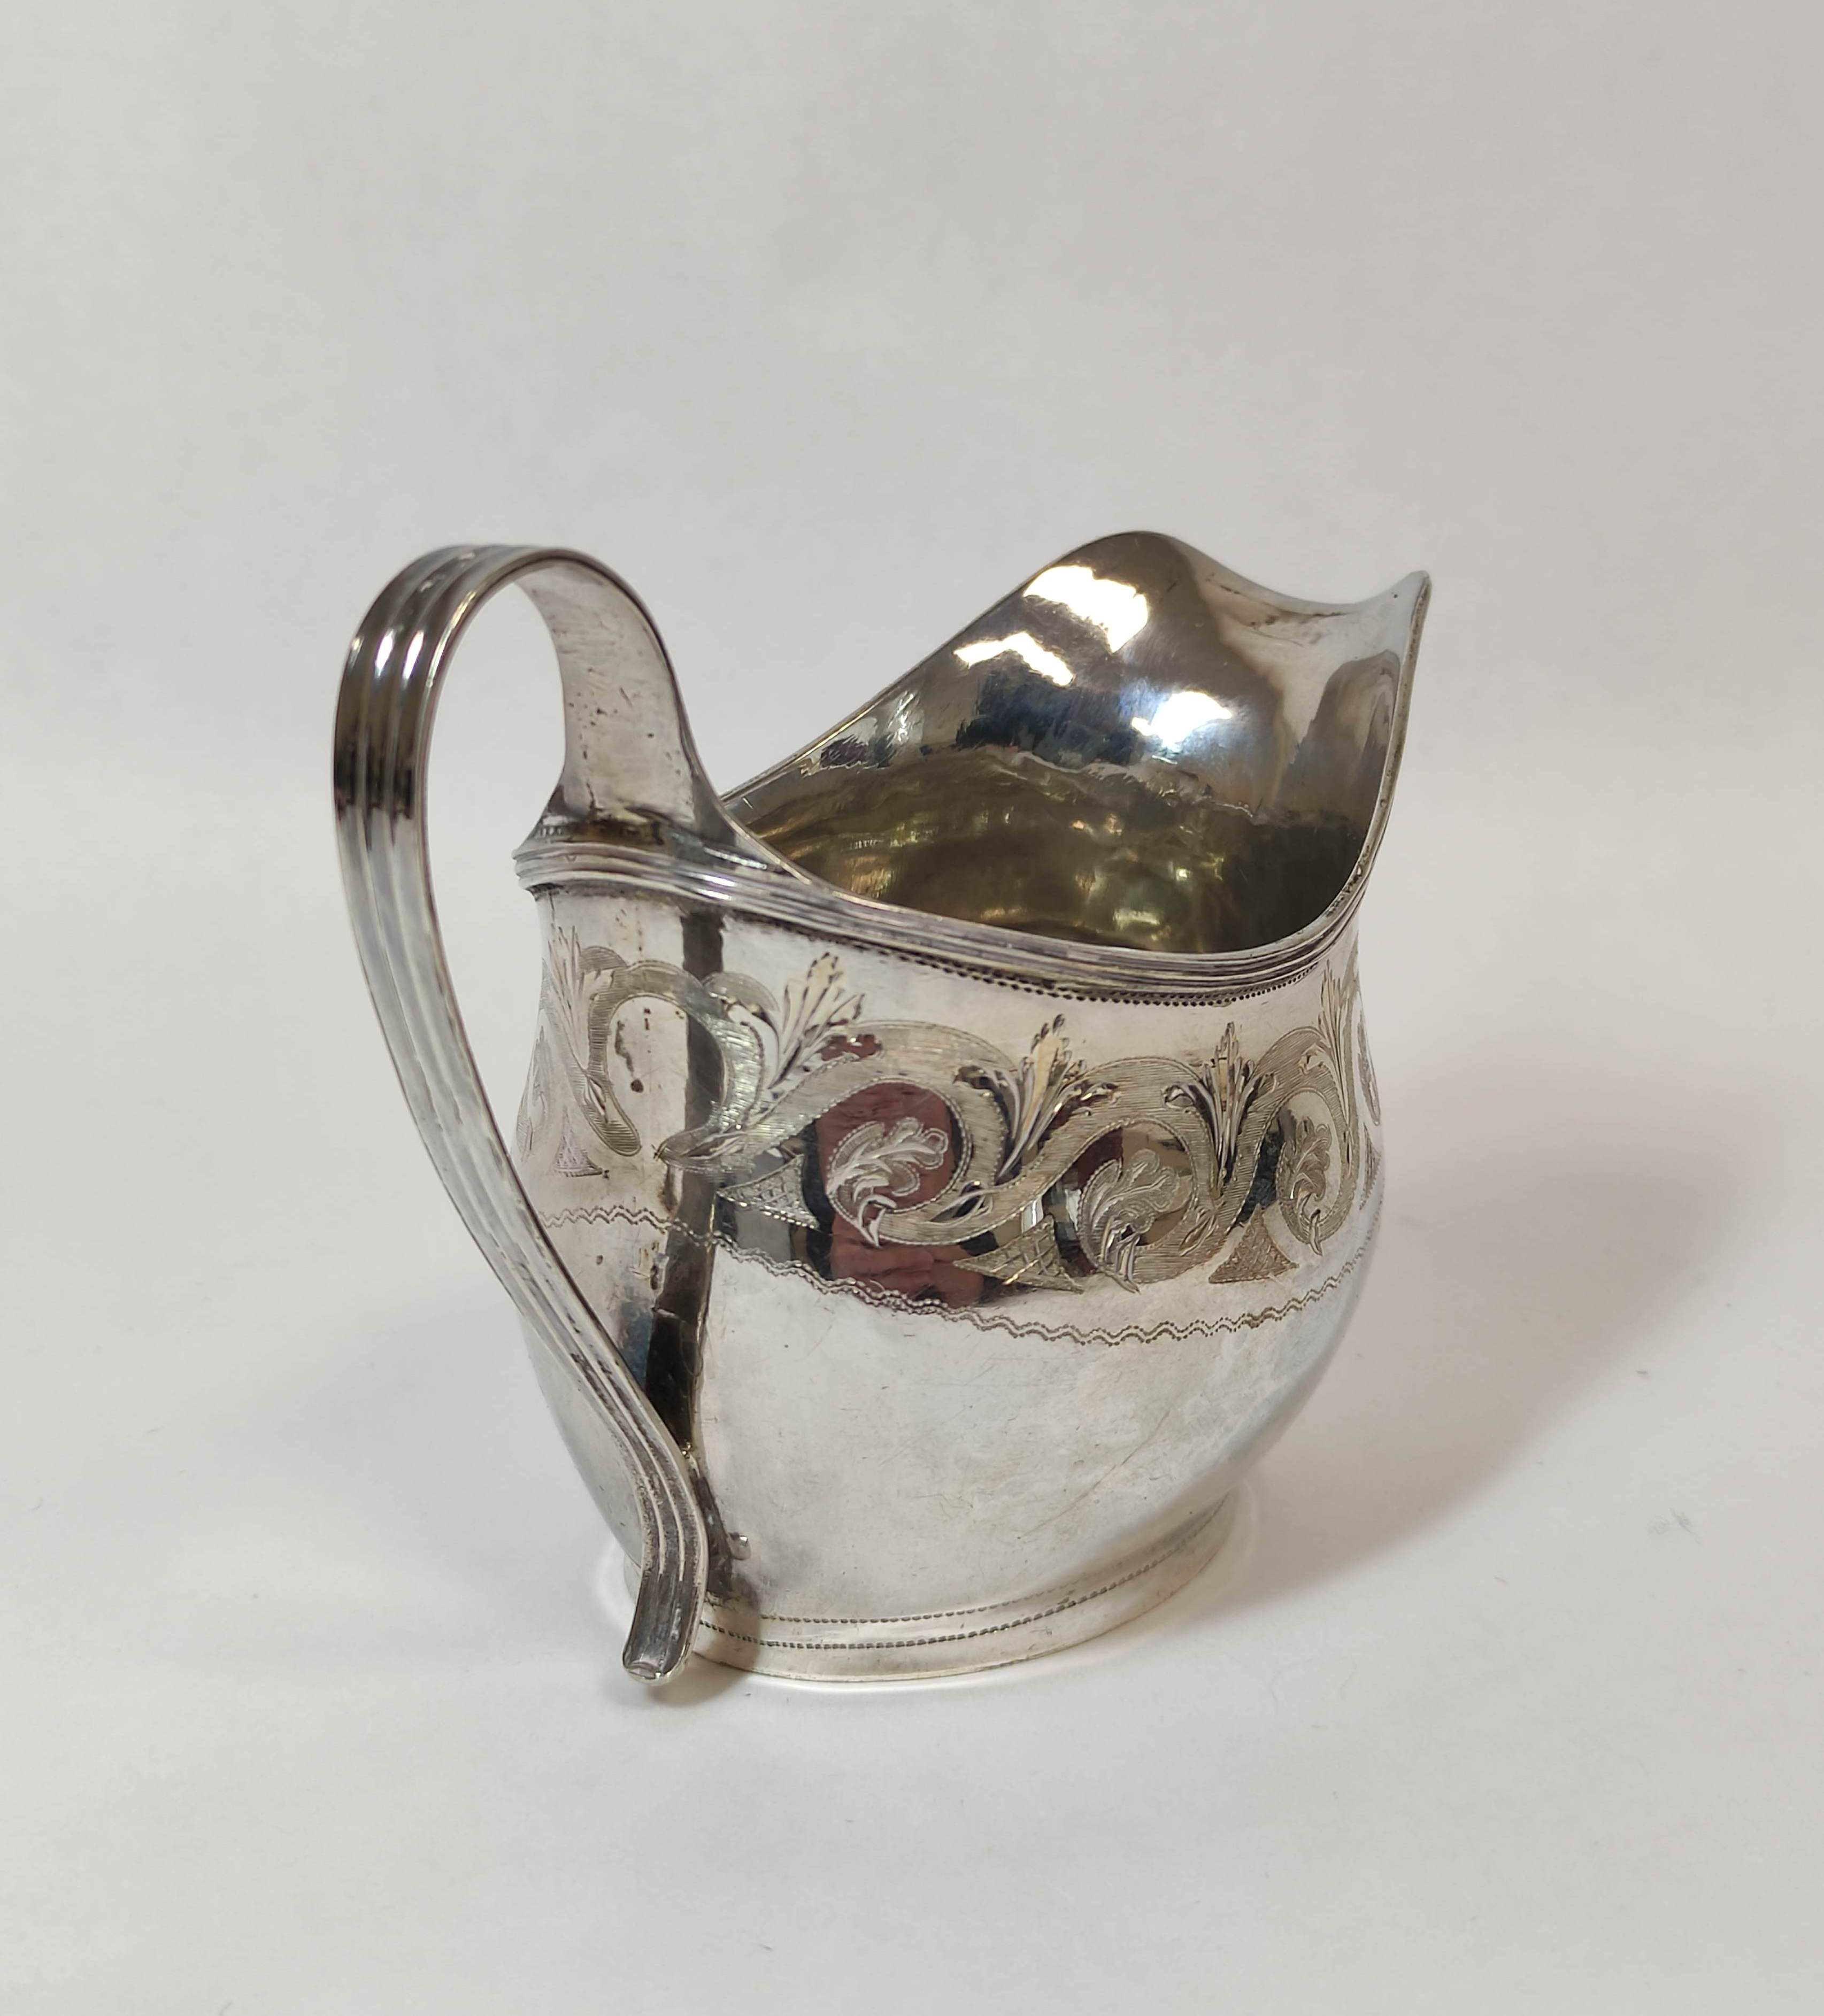 Silver cream jug of ovoid shape engraved with scrolls by P & W Bateman, 1812, 93g. - Image 2 of 5